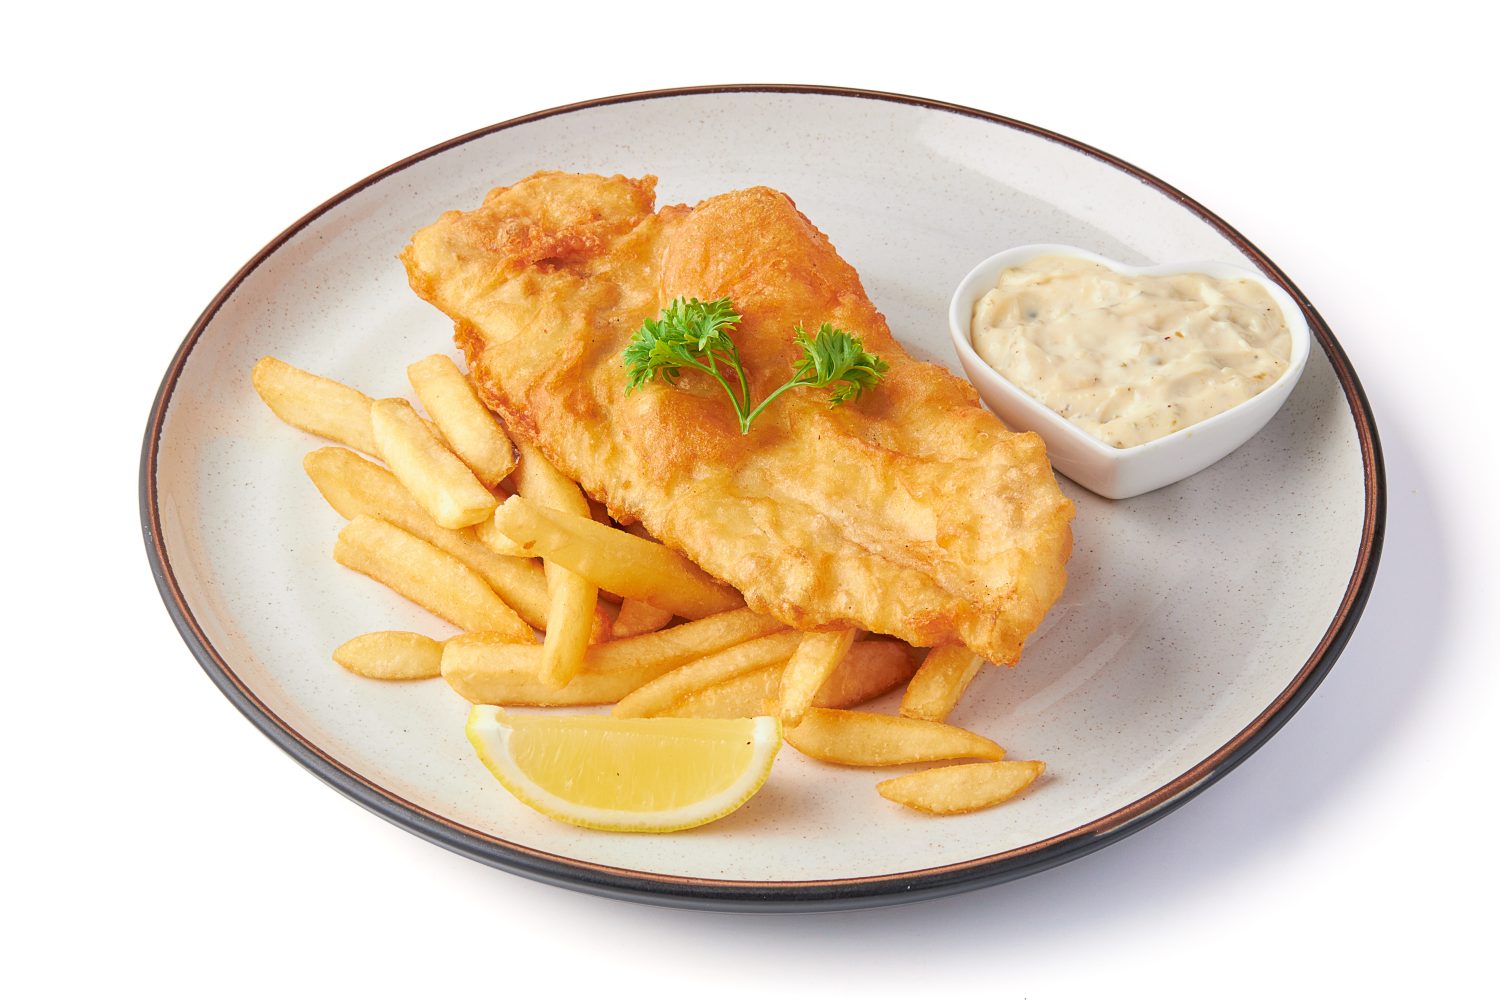 fish and chips served with french fries and tartar sauce with sliced lemon on plate isolated on white background.